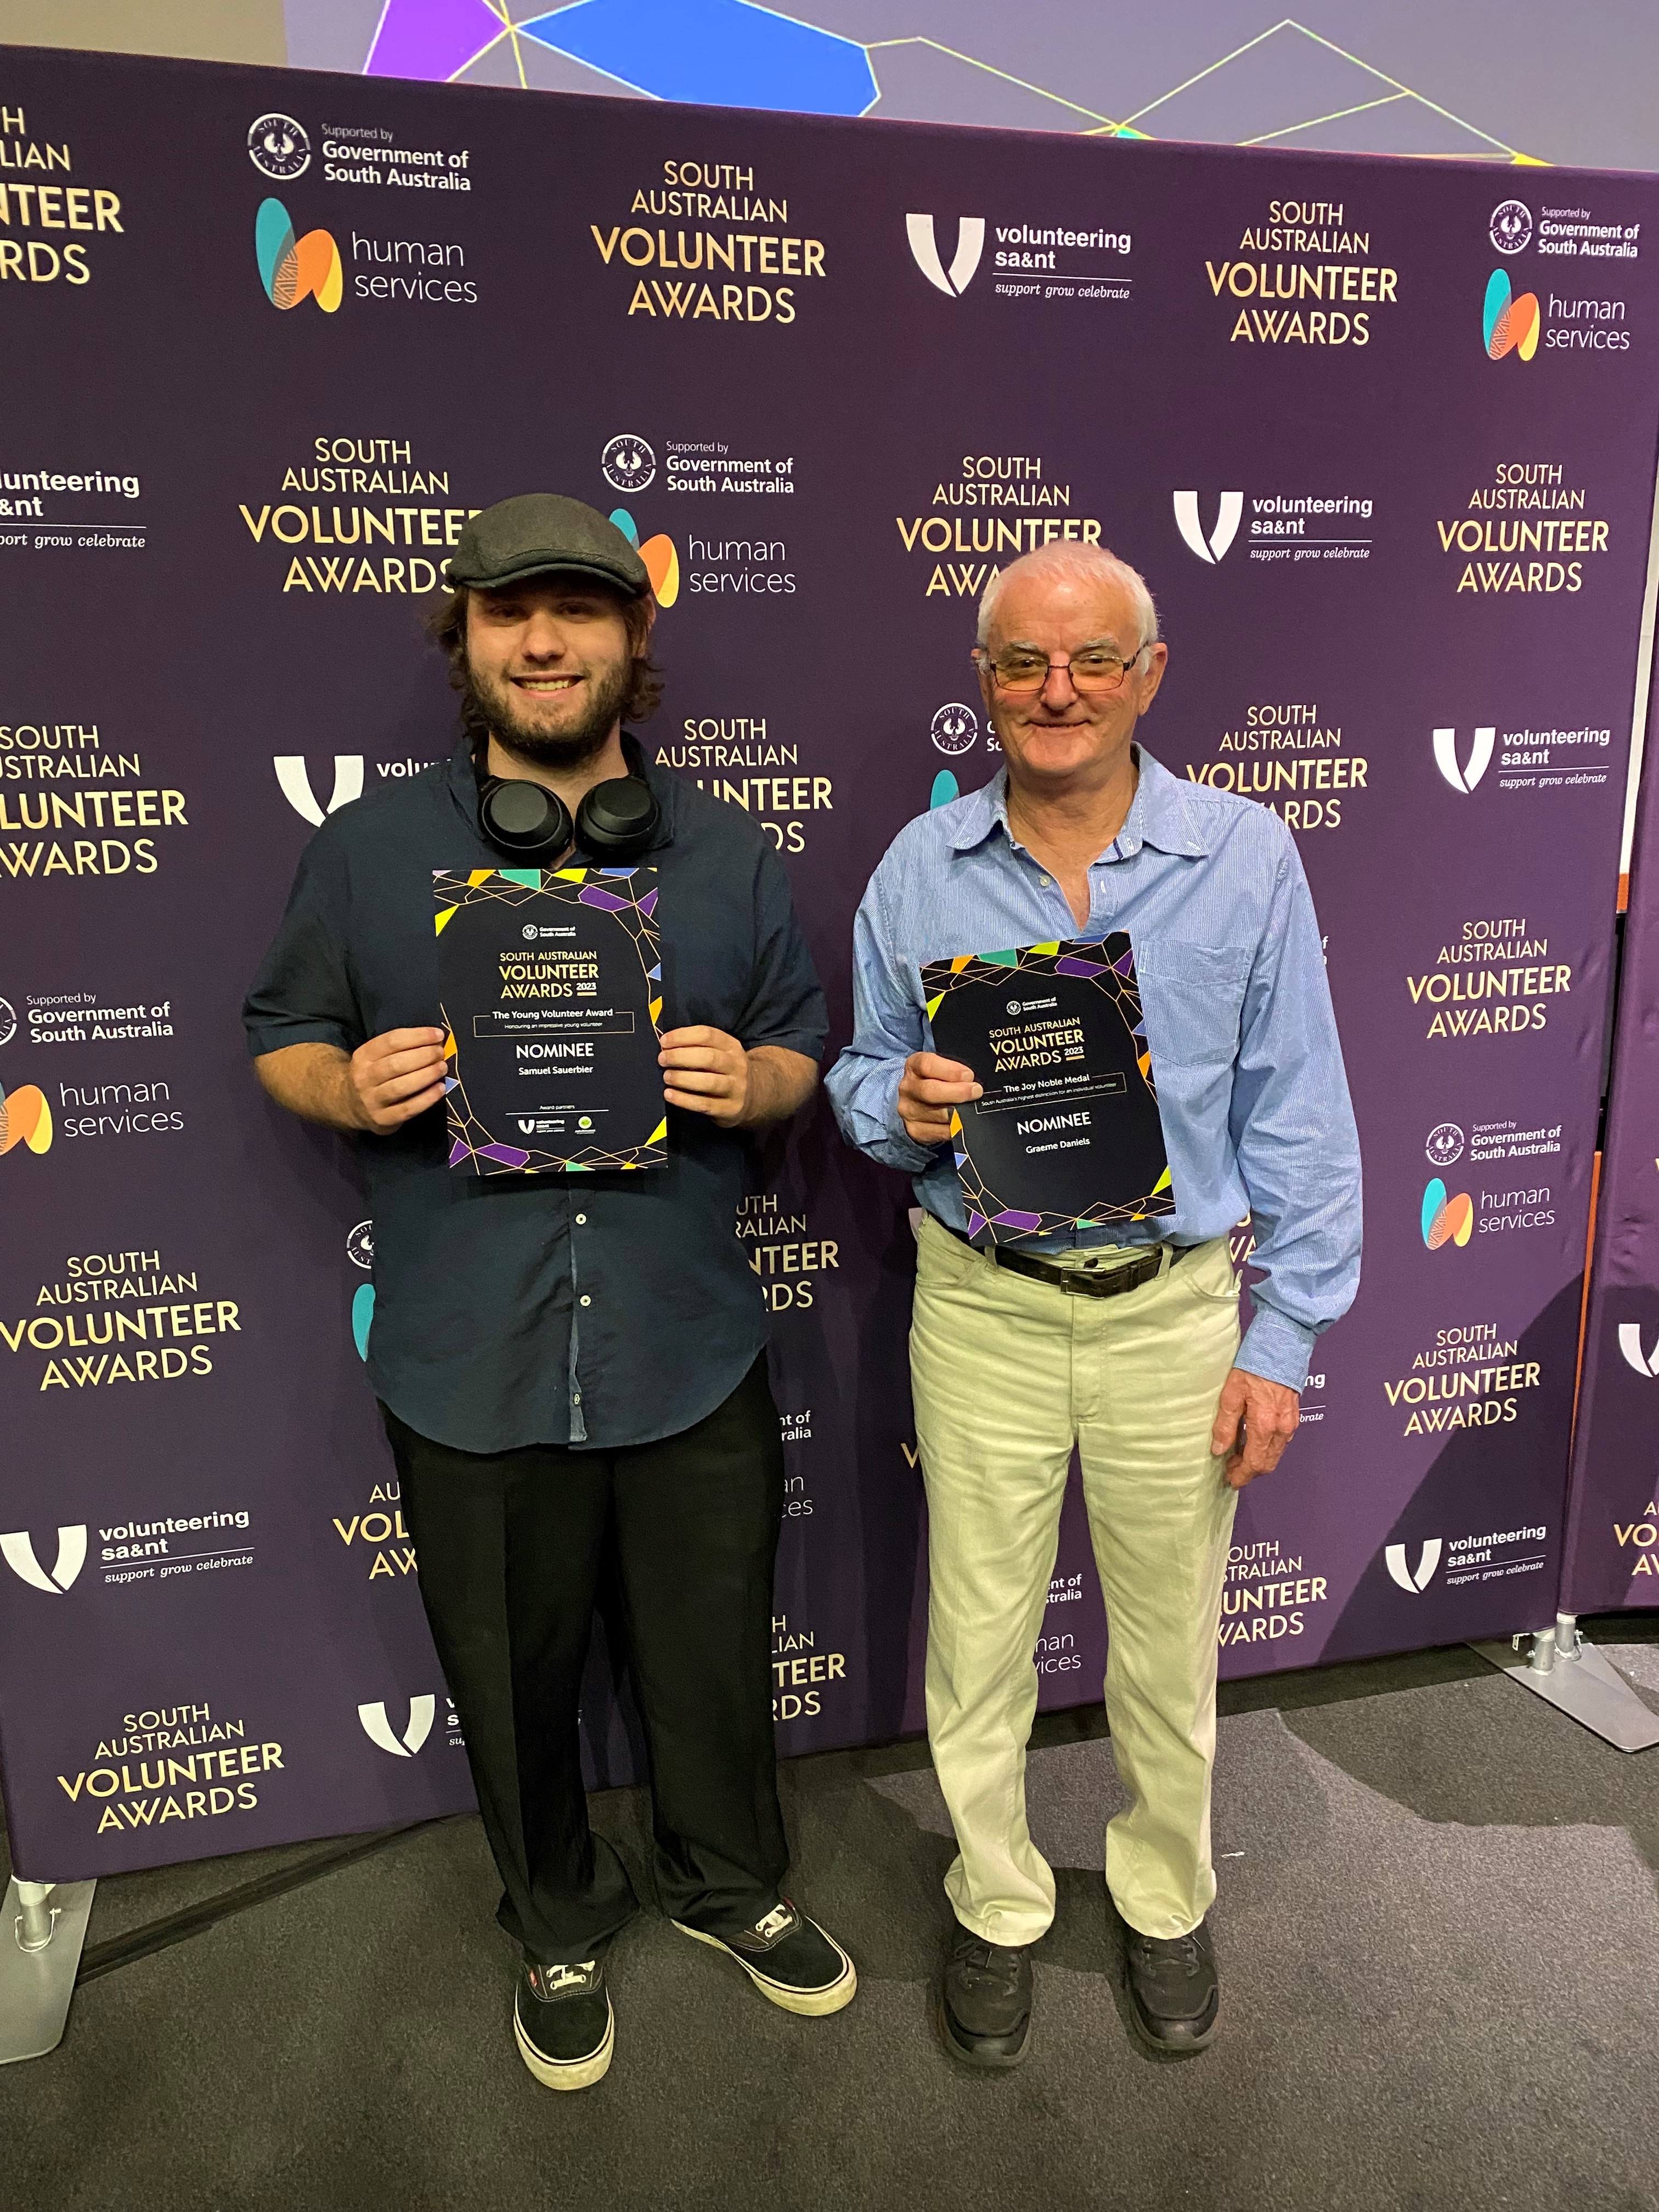 5 Sam Sauerbier on the left and Graeme Daniels on the right at the SA Volunteer State Awards Ceremony.jpg